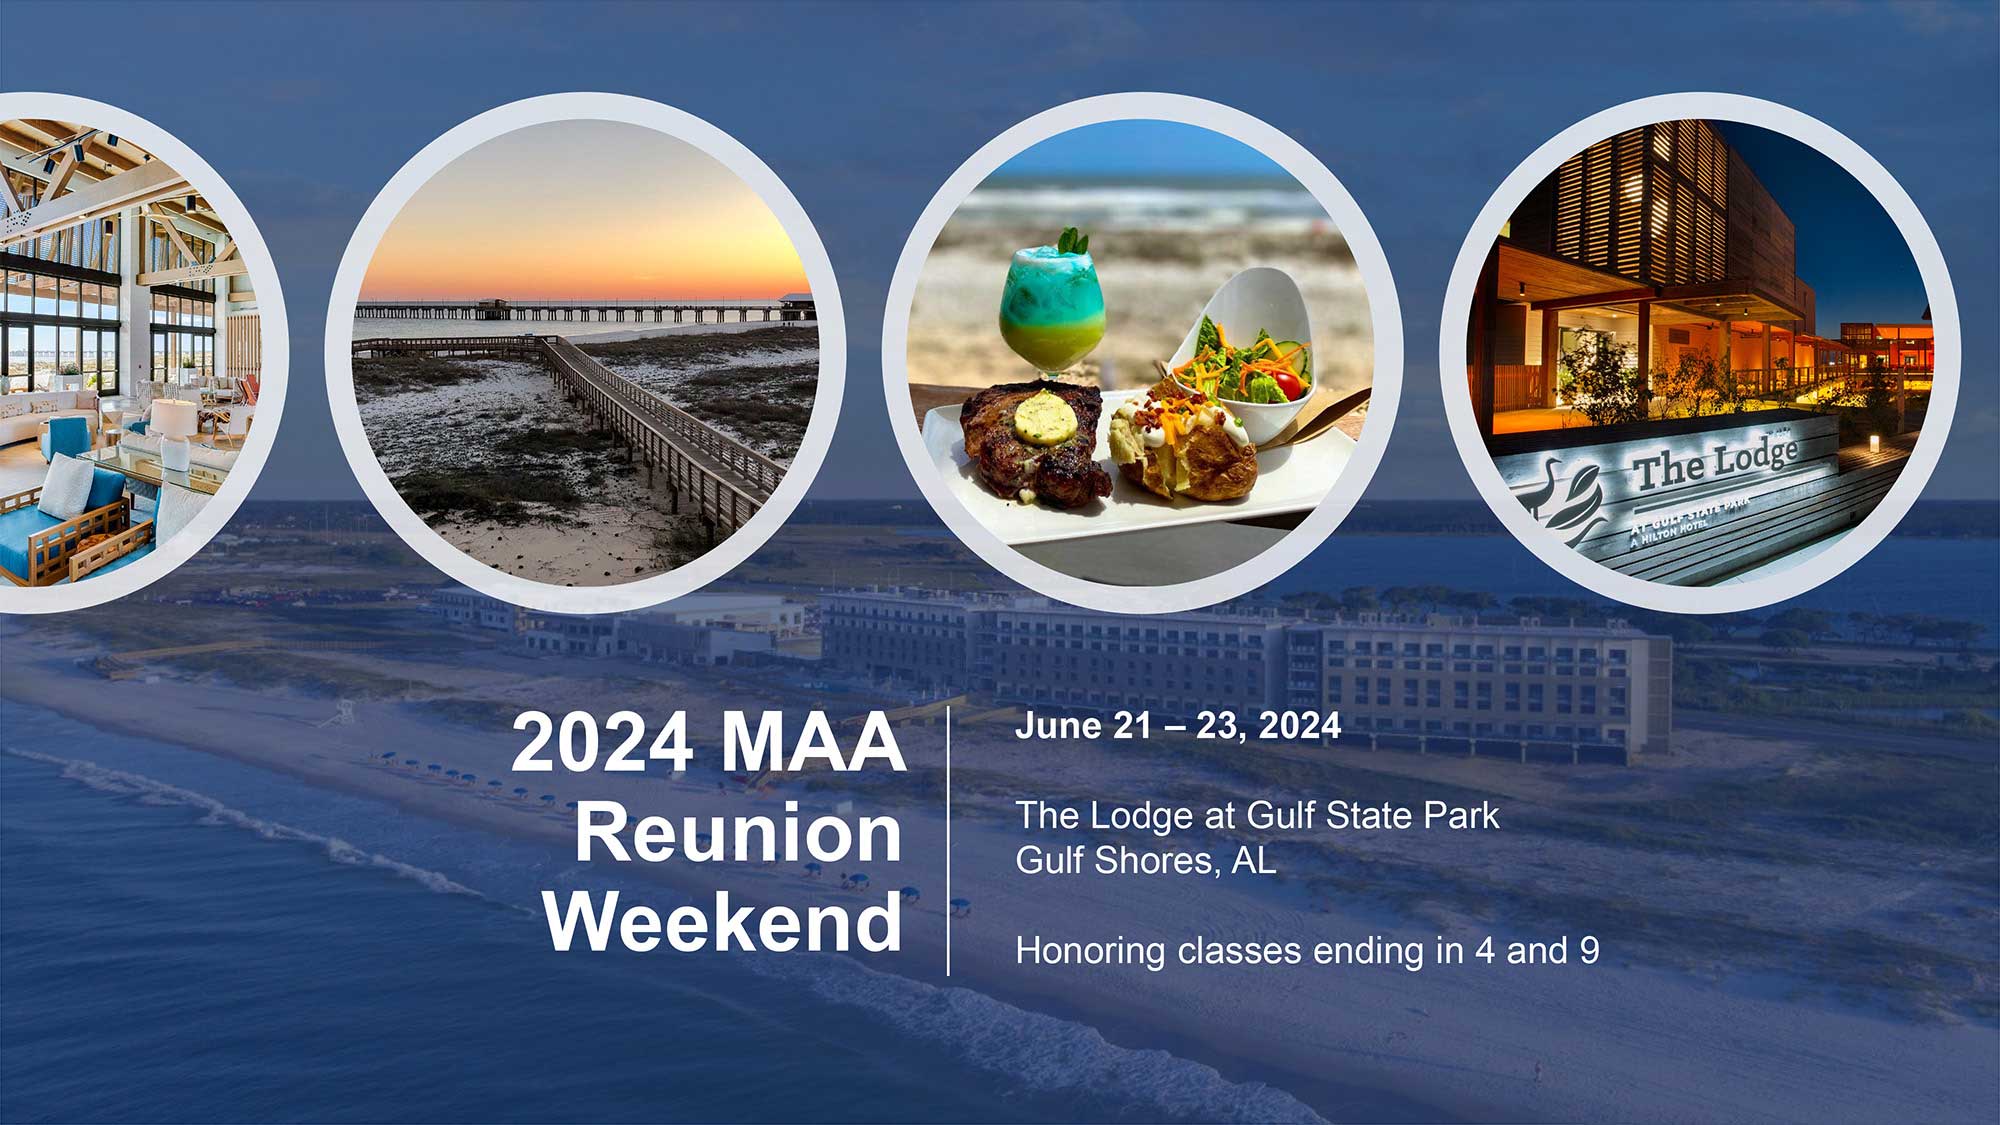 Make plans to join us for next year's Medical Alumni Reunion Weekend at The Lodge at Gulf State Park, Gulf Shores, AL.